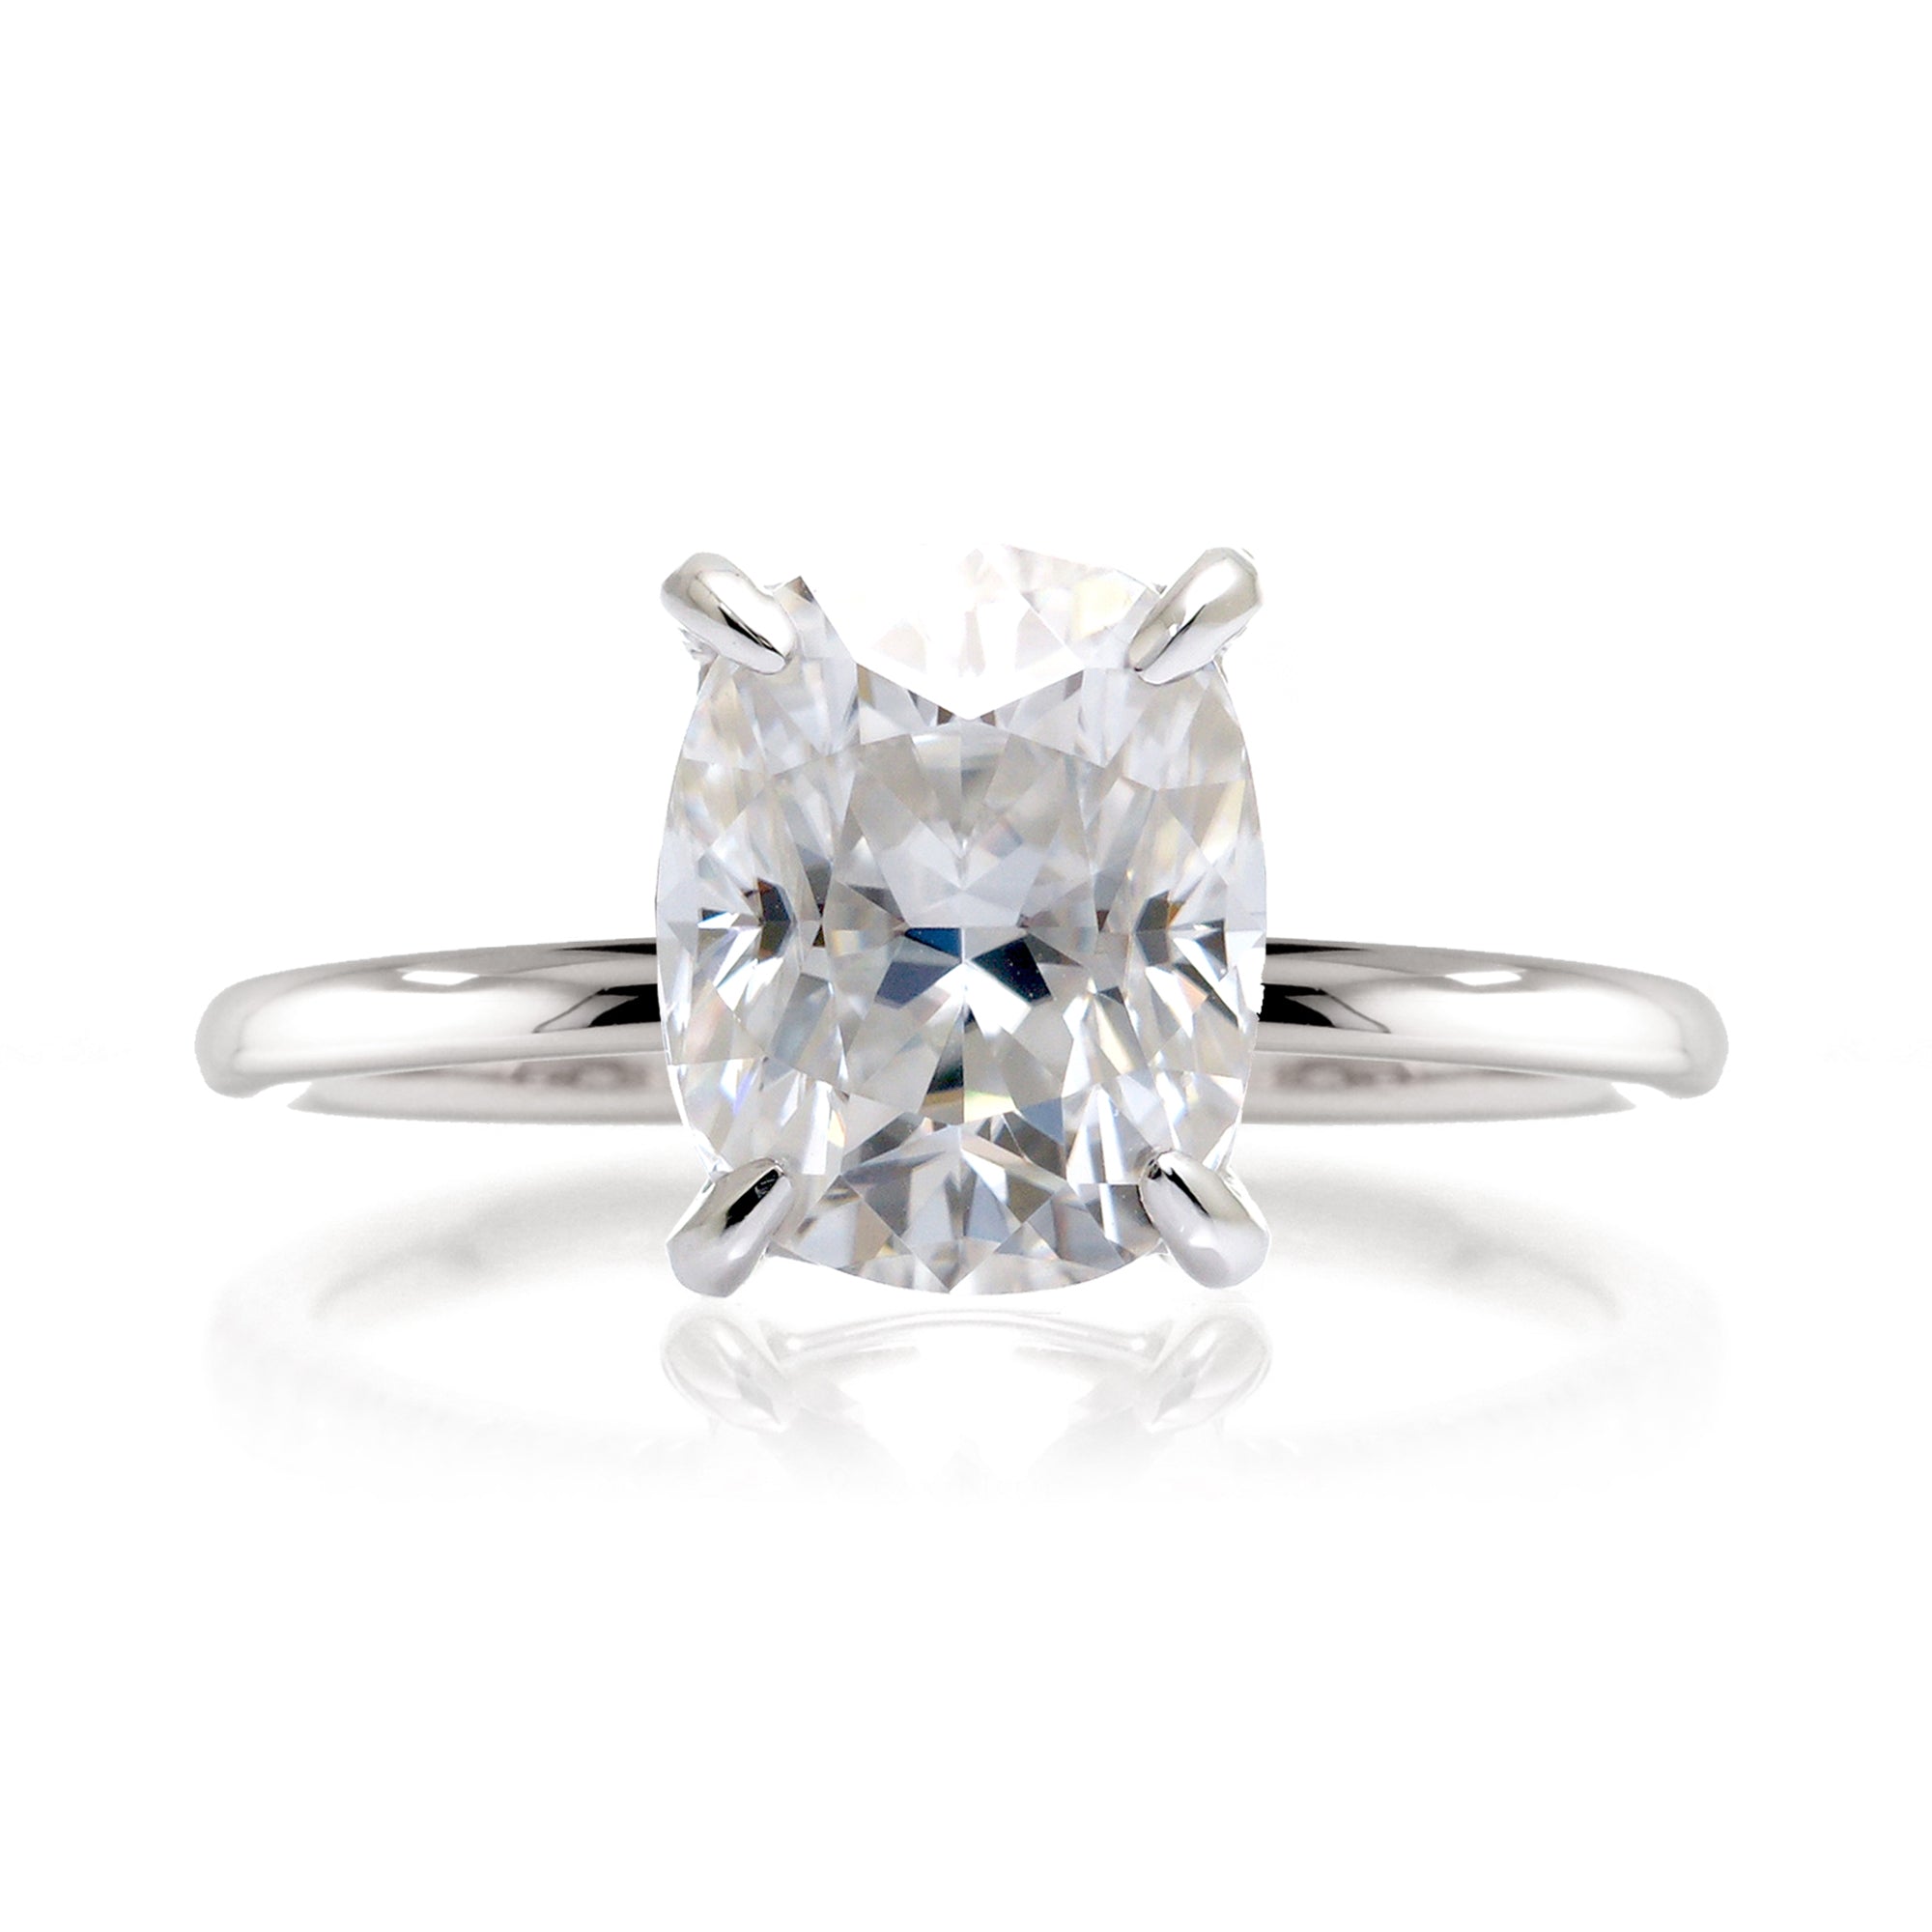 Long cushion moissanite Solid band engagement ring white gold - The Ava